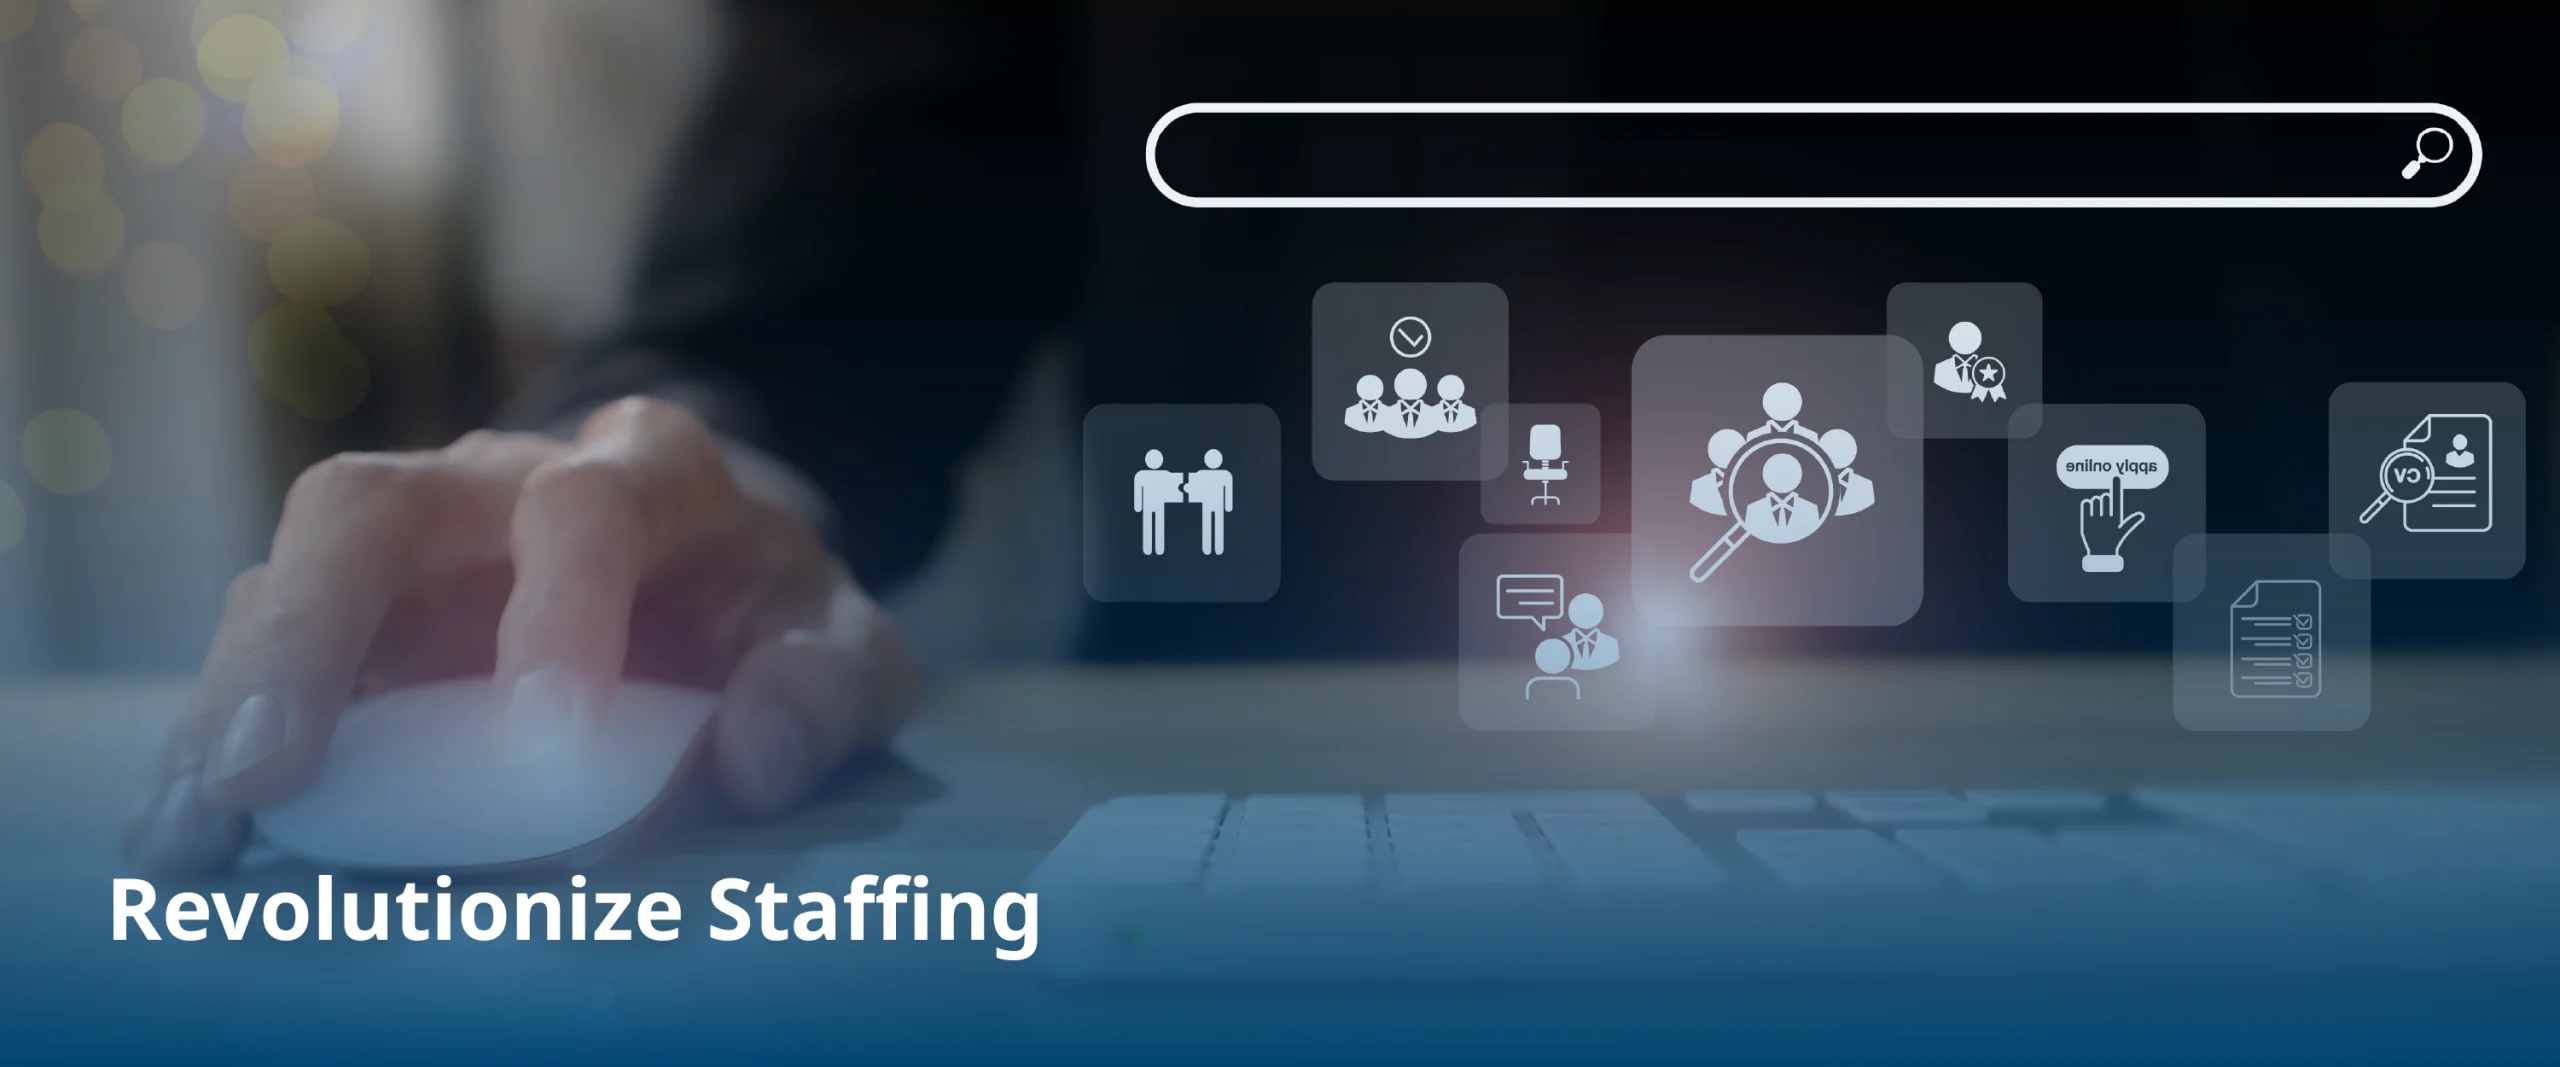 Revolutionizing Staffing With the Ultimate Workforce Management Solution